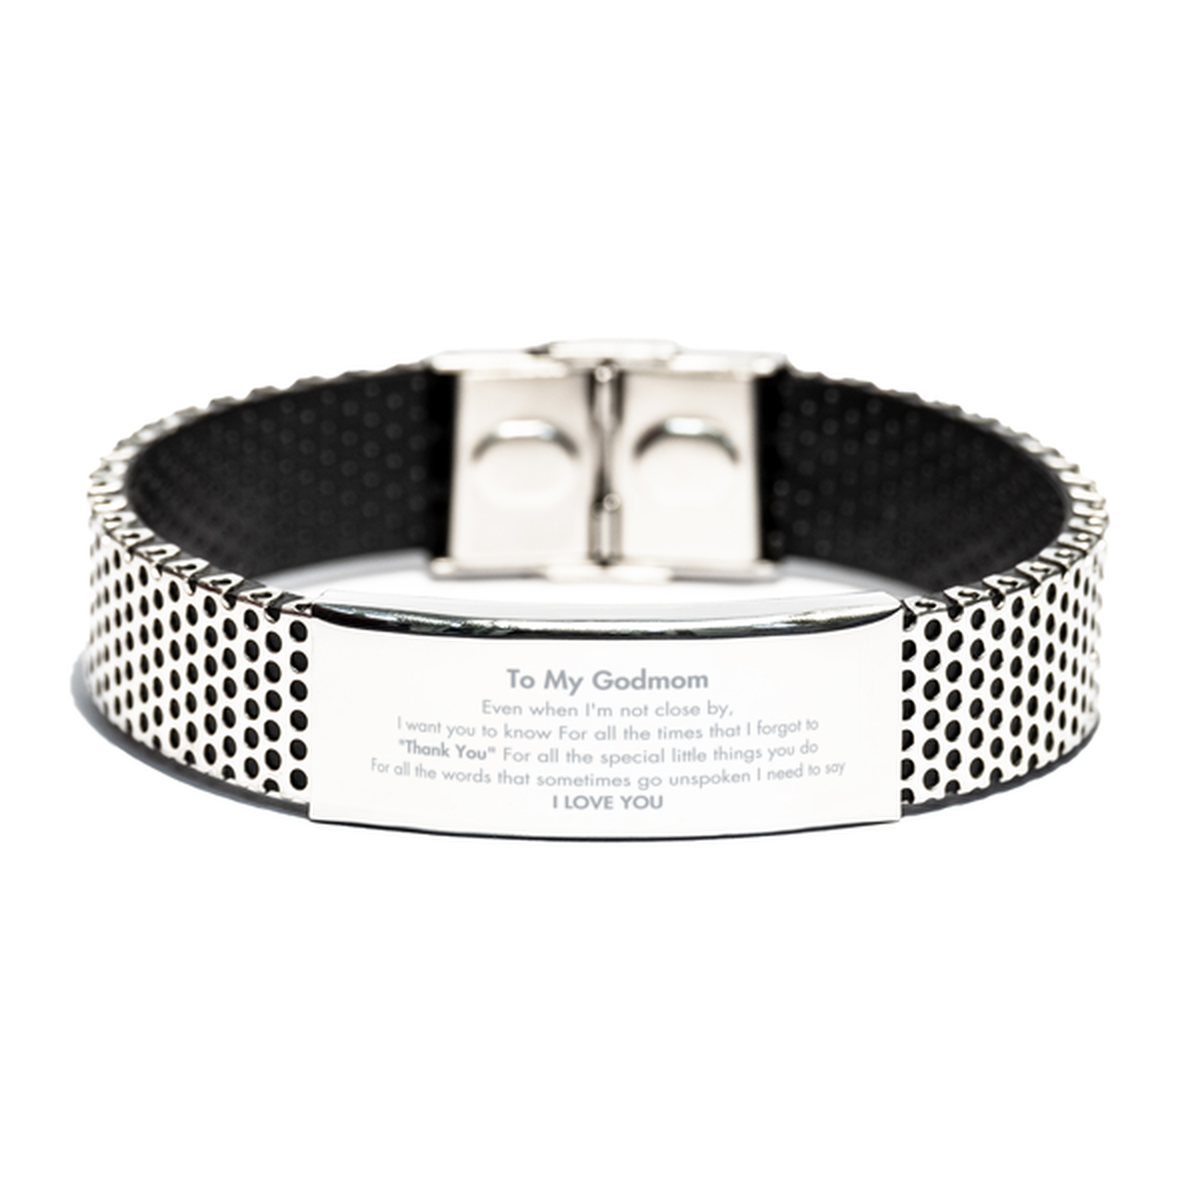 Thank You Gifts for Godmom, Keepsake Stainless Steel Bracelet Gifts for Godmom Birthday Mother's day Father's Day Godmom For all the words That sometimes go unspoken I need to say I LOVE YOU